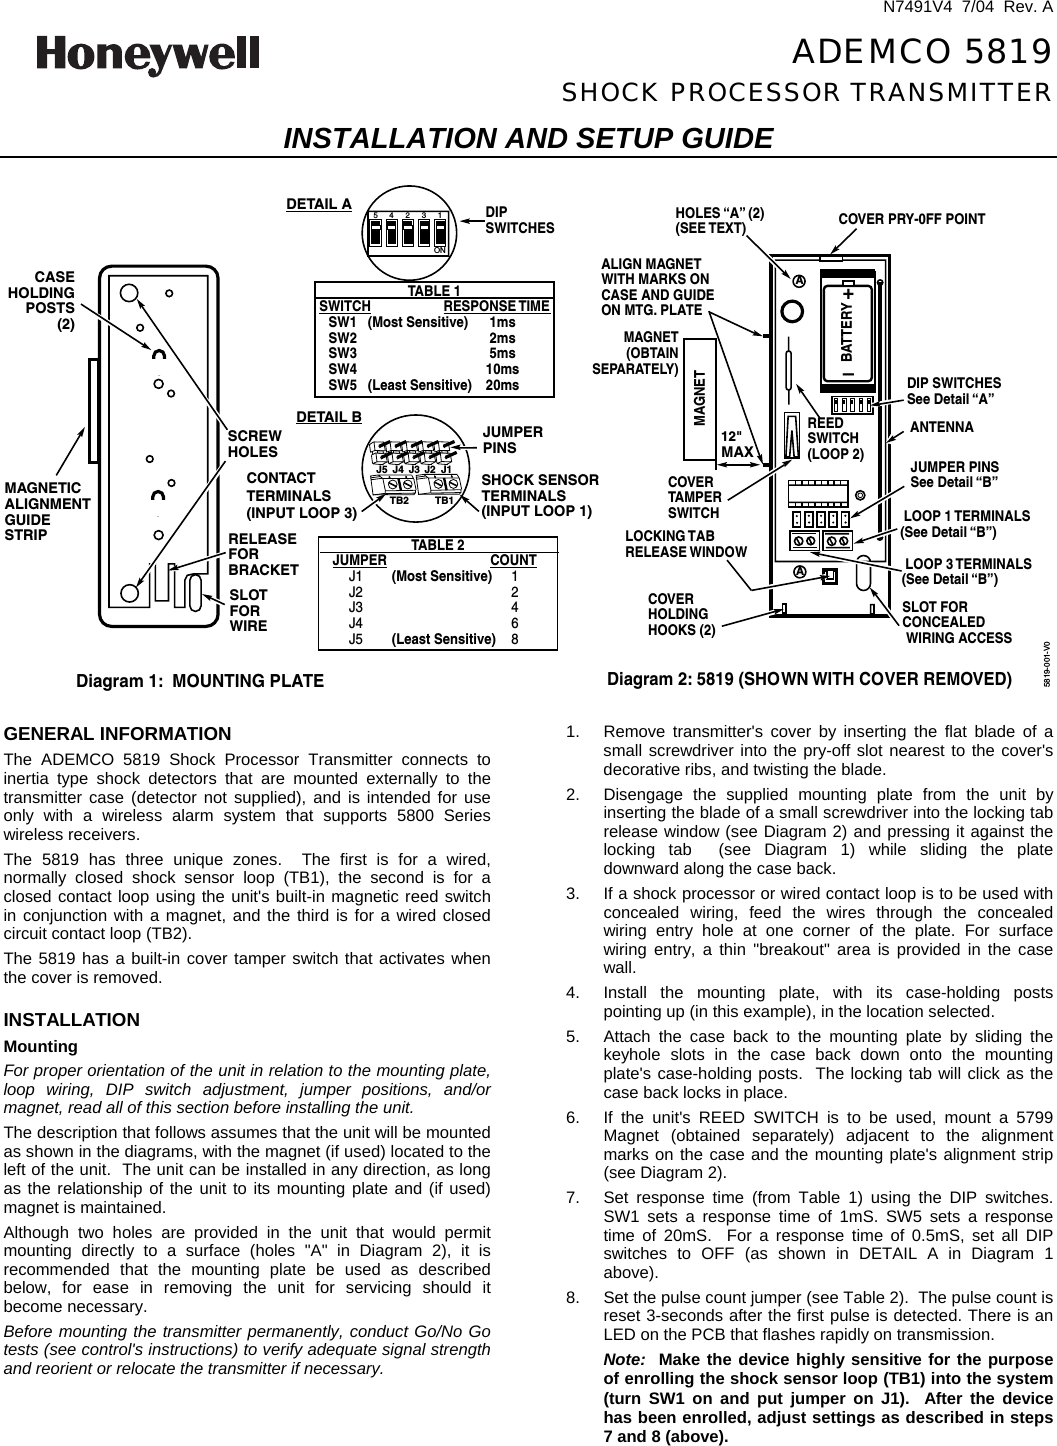  N7491V4  7/04  Rev. A  ADEMCO 5819 SHOCK PROCESSOR TRANSMITTER INSTALLATION AND SETUP GUIDE  A+–BATTERYREEDSWITCH(LOOP 2)COVER PRY-0FF POINTALIGN MAGNETWITH MARKS ONCASE AND GUIDEON MTG. PLATEMAGNET (OBTAIN SEPARATELY)LOOP 1 TERMINALS(See Detail “B”)LOCKING TABRELEASE WINDOWCOVERHOLDINGHOOKS (2)COVERTAMPERSWITCHHOLES “A” (2)(SEE TEXT)ANTENNADIP SWITCHESSee Detail “A”DIPSWITCHESJUMPER PINSSee Detail “B”SLOT FORCONCEALEDWIRING ACCESSAMAGNETDiagram 2: 5819 (SHOWN WITH COVER REMOVED)12&quot;MAX12345ONTB2 TB1MAGNETICALIGNMENTGUIDESTRIP RELEASE FORBRACKETCASEHOLDINGPOSTS(2)SLOT FOR WIRESCREWHOLESDiagram 1:  MOUNTING PLATETABLE 1SWITCH RESPONSE TIMESW1   (Most Sensitive) 1msSW2 2msSW3 5msSW4 10msSW5   (Least Sensitive) 20msJUMPERPINSSHOCK SENSORTERMINALS(INPUT LOOP 1)TABLE 2JUMPER COUNTJ1        (Most Sensitive) 1J2 2J3 4J4 6J5        (Least Sensitive) 8J5 J4 J3 J2 J1DETAIL BDETAIL ACONTACTTERMINALS(INPUT LOOP 3)LOOP 3 TERMINALS(See Detail “B”)5819-001-V0  GENERAL INFORMATION The ADEMCO 5819 Shock Processor Transmitter connects to inertia type shock detectors that are mounted externally to the transmitter case (detector not supplied), and is intended for use only with a wireless alarm system that supports 5800 Series wireless receivers. The 5819 has three unique zones.  The first is for a wired, normally closed shock sensor loop (TB1), the second is for a closed contact loop using the unit&apos;s built-in magnetic reed switch in conjunction with a magnet, and the third is for a wired closed circuit contact loop (TB2).   The 5819 has a built-in cover tamper switch that activates when the cover is removed.  INSTALLATION Mounting For proper orientation of the unit in relation to the mounting plate, loop wiring, DIP switch adjustment, jumper positions, and/or magnet, read all of this section before installing the unit. The description that follows assumes that the unit will be mounted as shown in the diagrams, with the magnet (if used) located to the left of the unit.  The unit can be installed in any direction, as long as the relationship of the unit to its mounting plate and (if used) magnet is maintained. Although two holes are provided in the unit that would permit mounting directly to a surface (holes &quot;A&quot; in Diagram 2), it is recommended that the mounting plate be used as described below, for ease in removing the unit for servicing should it become necessary. Before mounting the transmitter permanently, conduct Go/No Go tests (see control&apos;s instructions) to verify adequate signal strength and reorient or relocate the transmitter if necessary. 1.  Remove transmitter&apos;s cover by inserting the flat blade of a small screwdriver into the pry-off slot nearest to the cover&apos;s decorative ribs, and twisting the blade. 2.  Disengage the supplied mounting plate from the unit by inserting the blade of a small screwdriver into the locking tab release window (see Diagram 2) and pressing it against the locking tab  (see Diagram 1) while sliding the plate downward along the case back. 3.  If a shock processor or wired contact loop is to be used with concealed wiring, feed the wires through the concealed wiring entry hole at one corner of the plate. For surface wiring entry, a thin &quot;breakout&quot; area is provided in the case wall. 4.  Install the mounting plate, with its case-holding posts pointing up (in this example), in the location selected. 5.  Attach the case back to the mounting plate by sliding the keyhole slots in the case back down onto the mounting plate&apos;s case-holding posts.  The locking tab will click as the case back locks in place. 6.  If the unit&apos;s REED SWITCH is to be used, mount a 5799 Magnet (obtained separately) adjacent to the alignment marks on the case and the mounting plate&apos;s alignment strip (see Diagram 2). 7.  Set response time (from Table 1) using the DIP switches. SW1 sets a response time of 1mS. SW5 sets a response time of 20mS.  For a response time of 0.5mS, set all DIP switches to OFF (as shown in DETAIL A in Diagram 1 above).   8.  Set the pulse count jumper (see Table 2).  The pulse count is reset 3-seconds after the first pulse is detected. There is an LED on the PCB that flashes rapidly on transmission. Note:  Make the device highly sensitive for the purpose of enrolling the shock sensor loop (TB1) into the system (turn SW1 on and put jumper on J1).  After the device has been enrolled, adjust settings as described in steps 7 and 8 (above). 